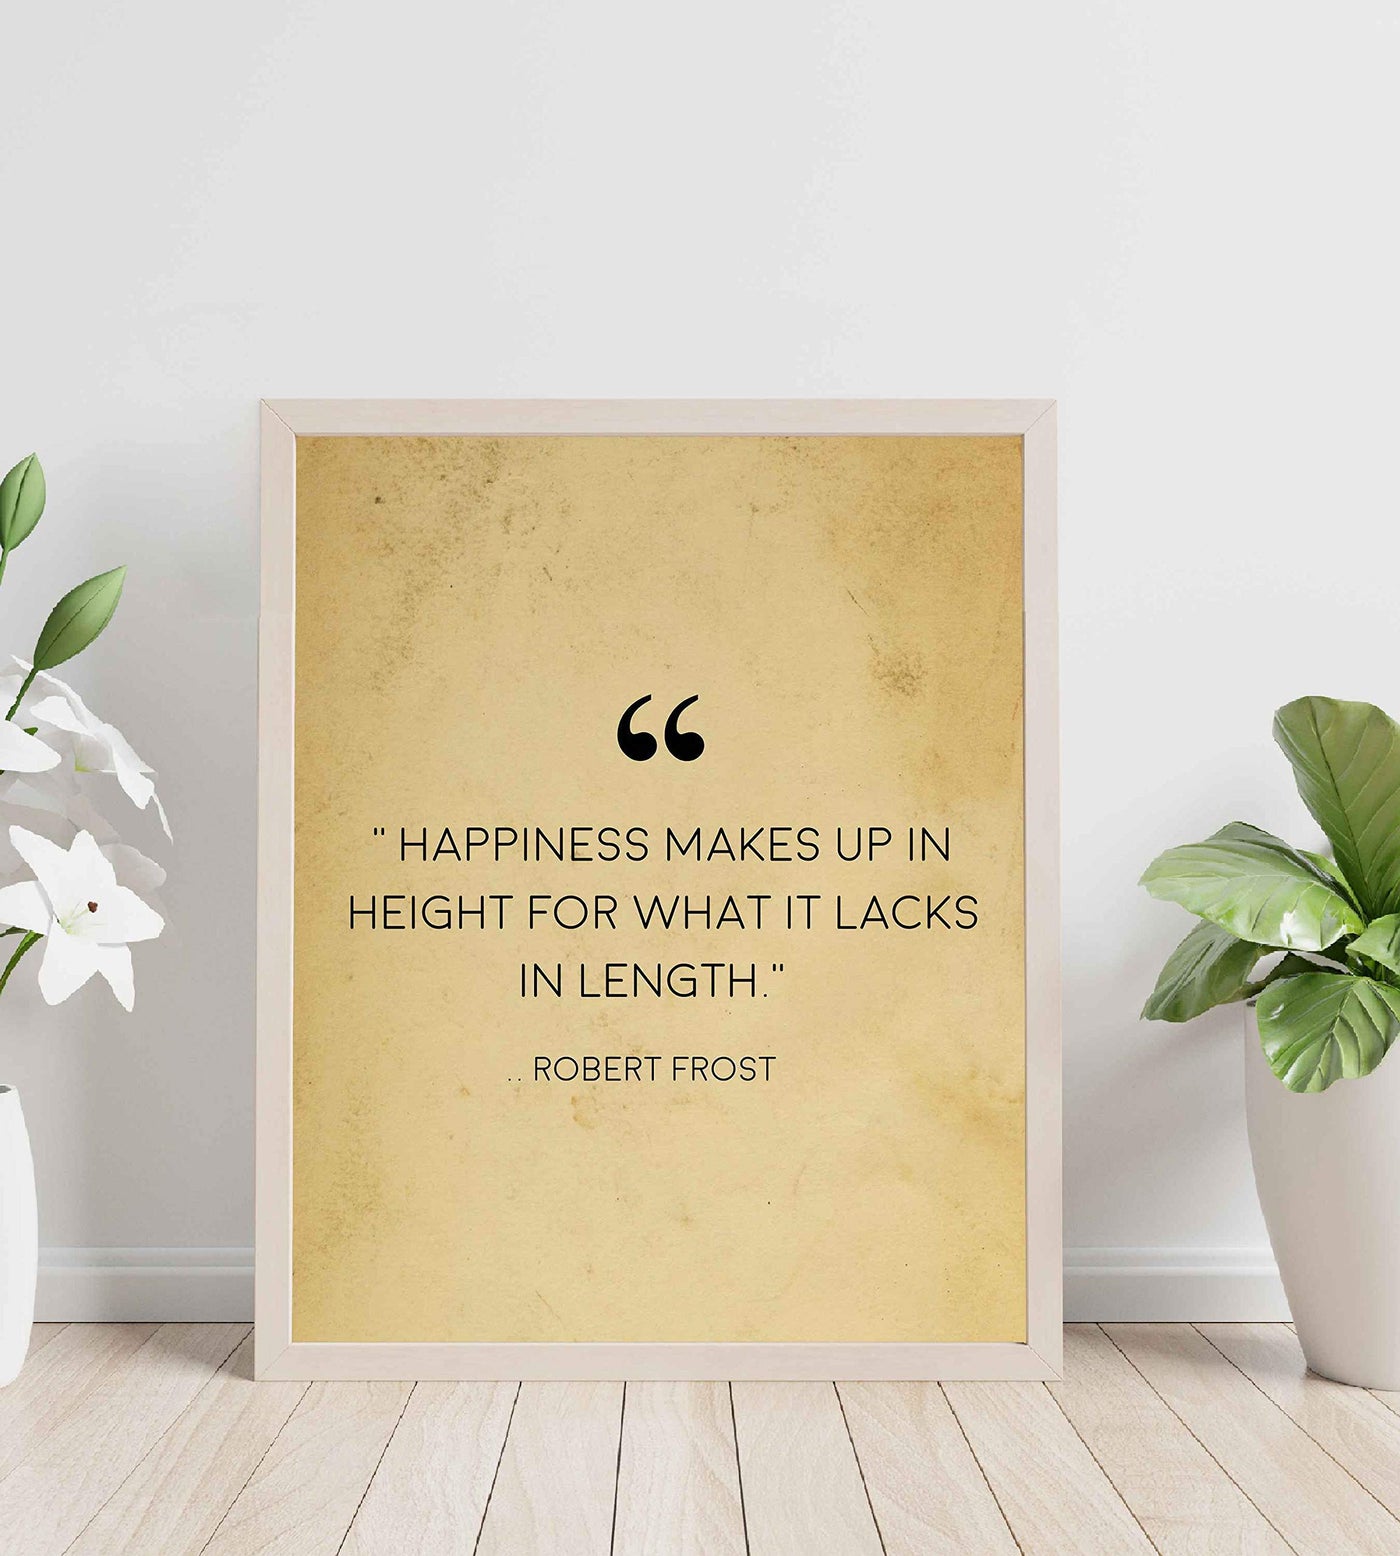 Robert Frost Quotes-"Happiness Makes Up in Height-Lacks in Length"-Poetic Wall Art Print-8 x 10" Wall Decor-Ready to Frame. Classic Typographic Poster Print. Inspirational Home-Office-Library Decor!